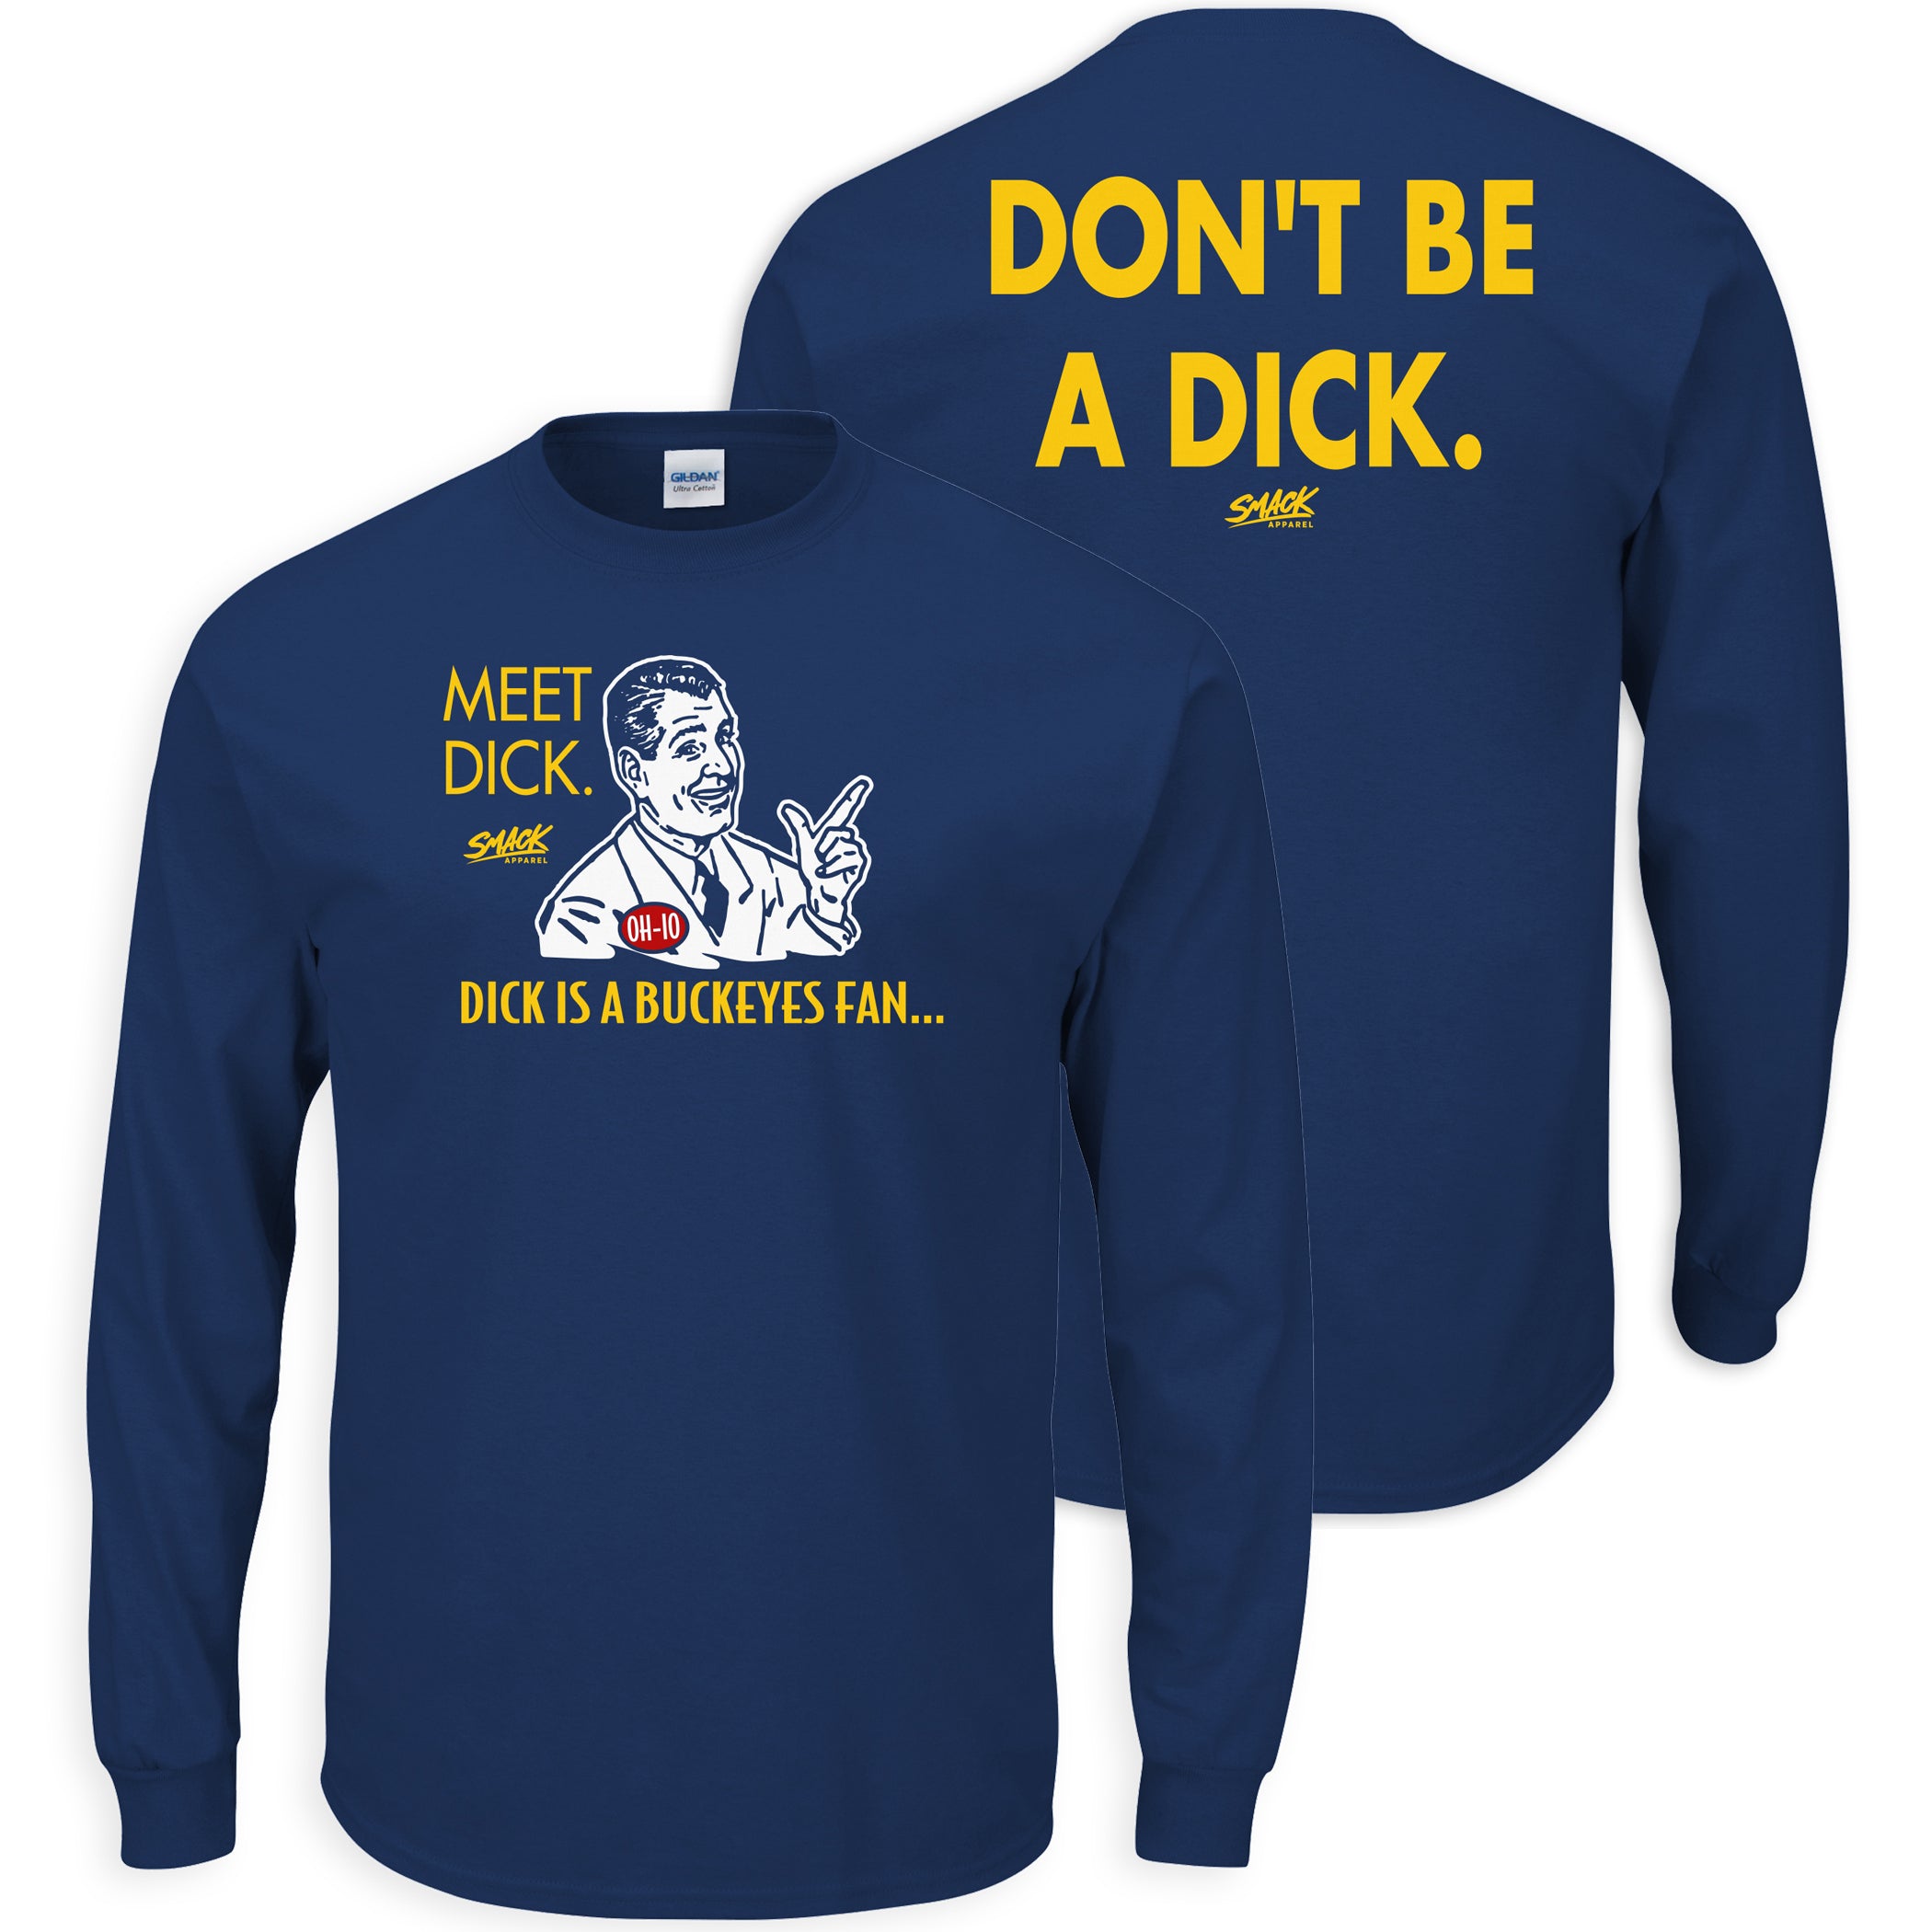 Michigan Football Fans. Don't be a Dick (Anti-Buckeyes or Anti-Spartans) T-Shirt